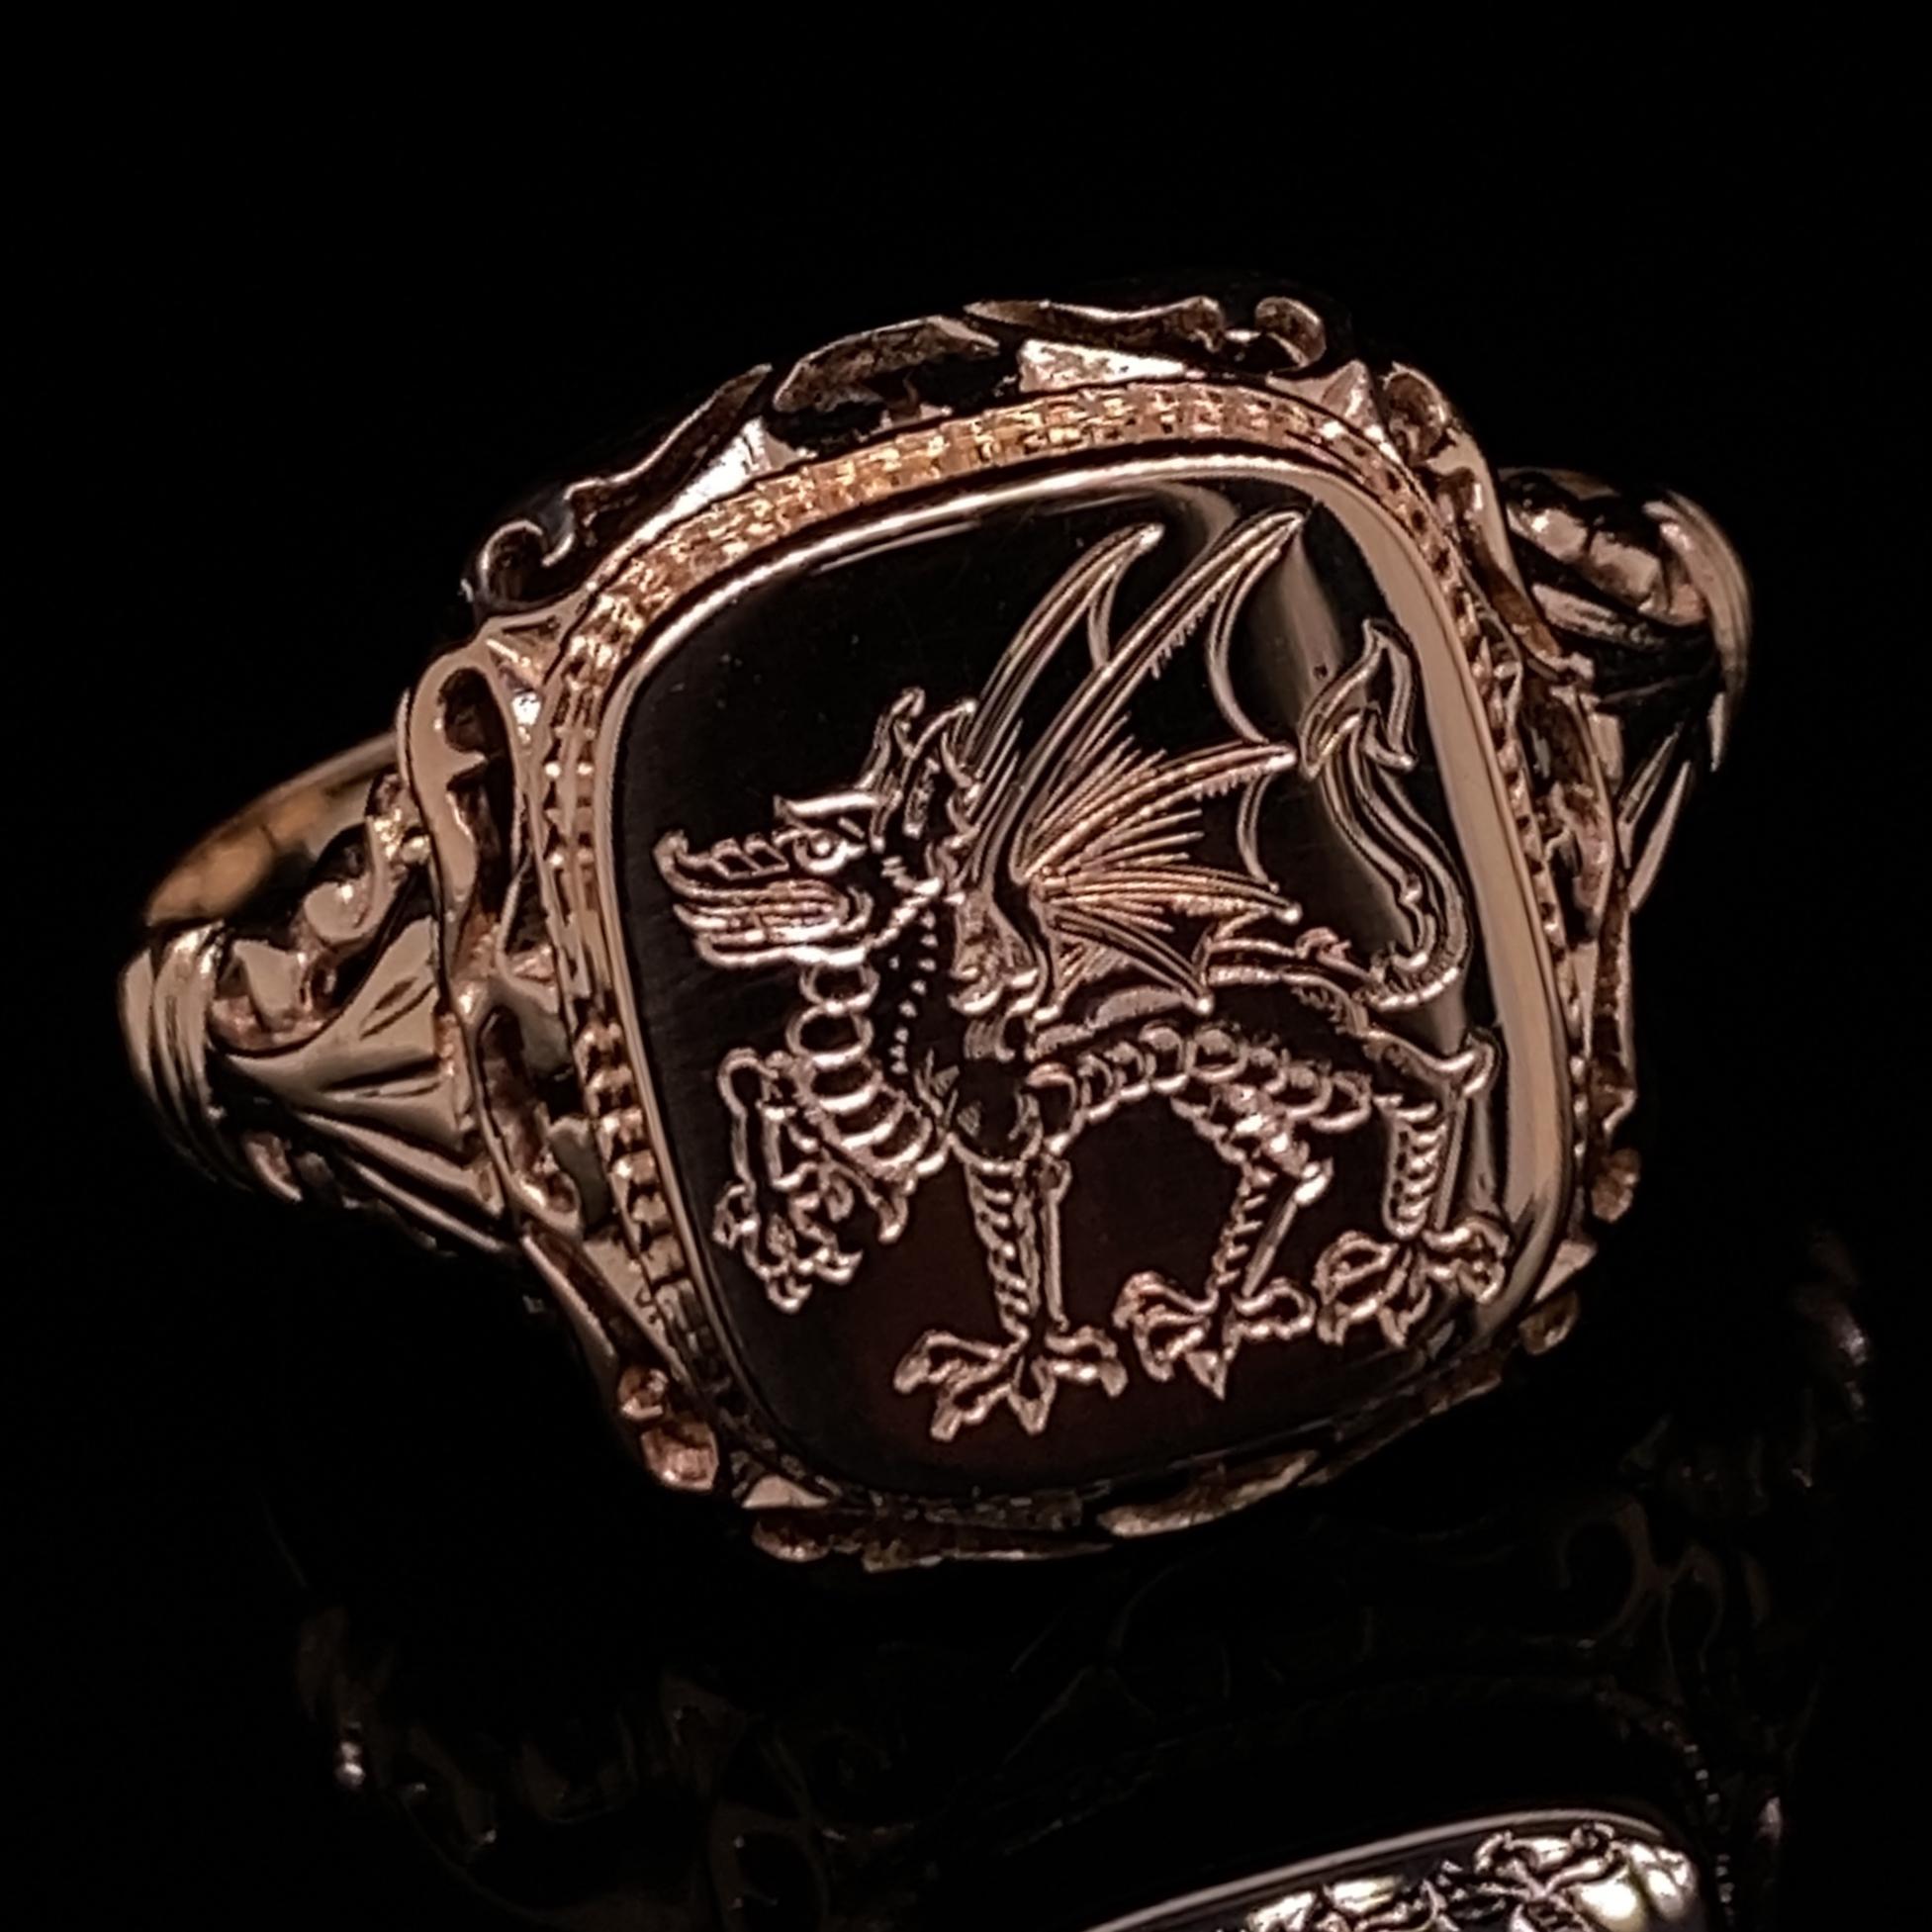 This is a 14 karat rose gold Hungarian signet ring that came to us 